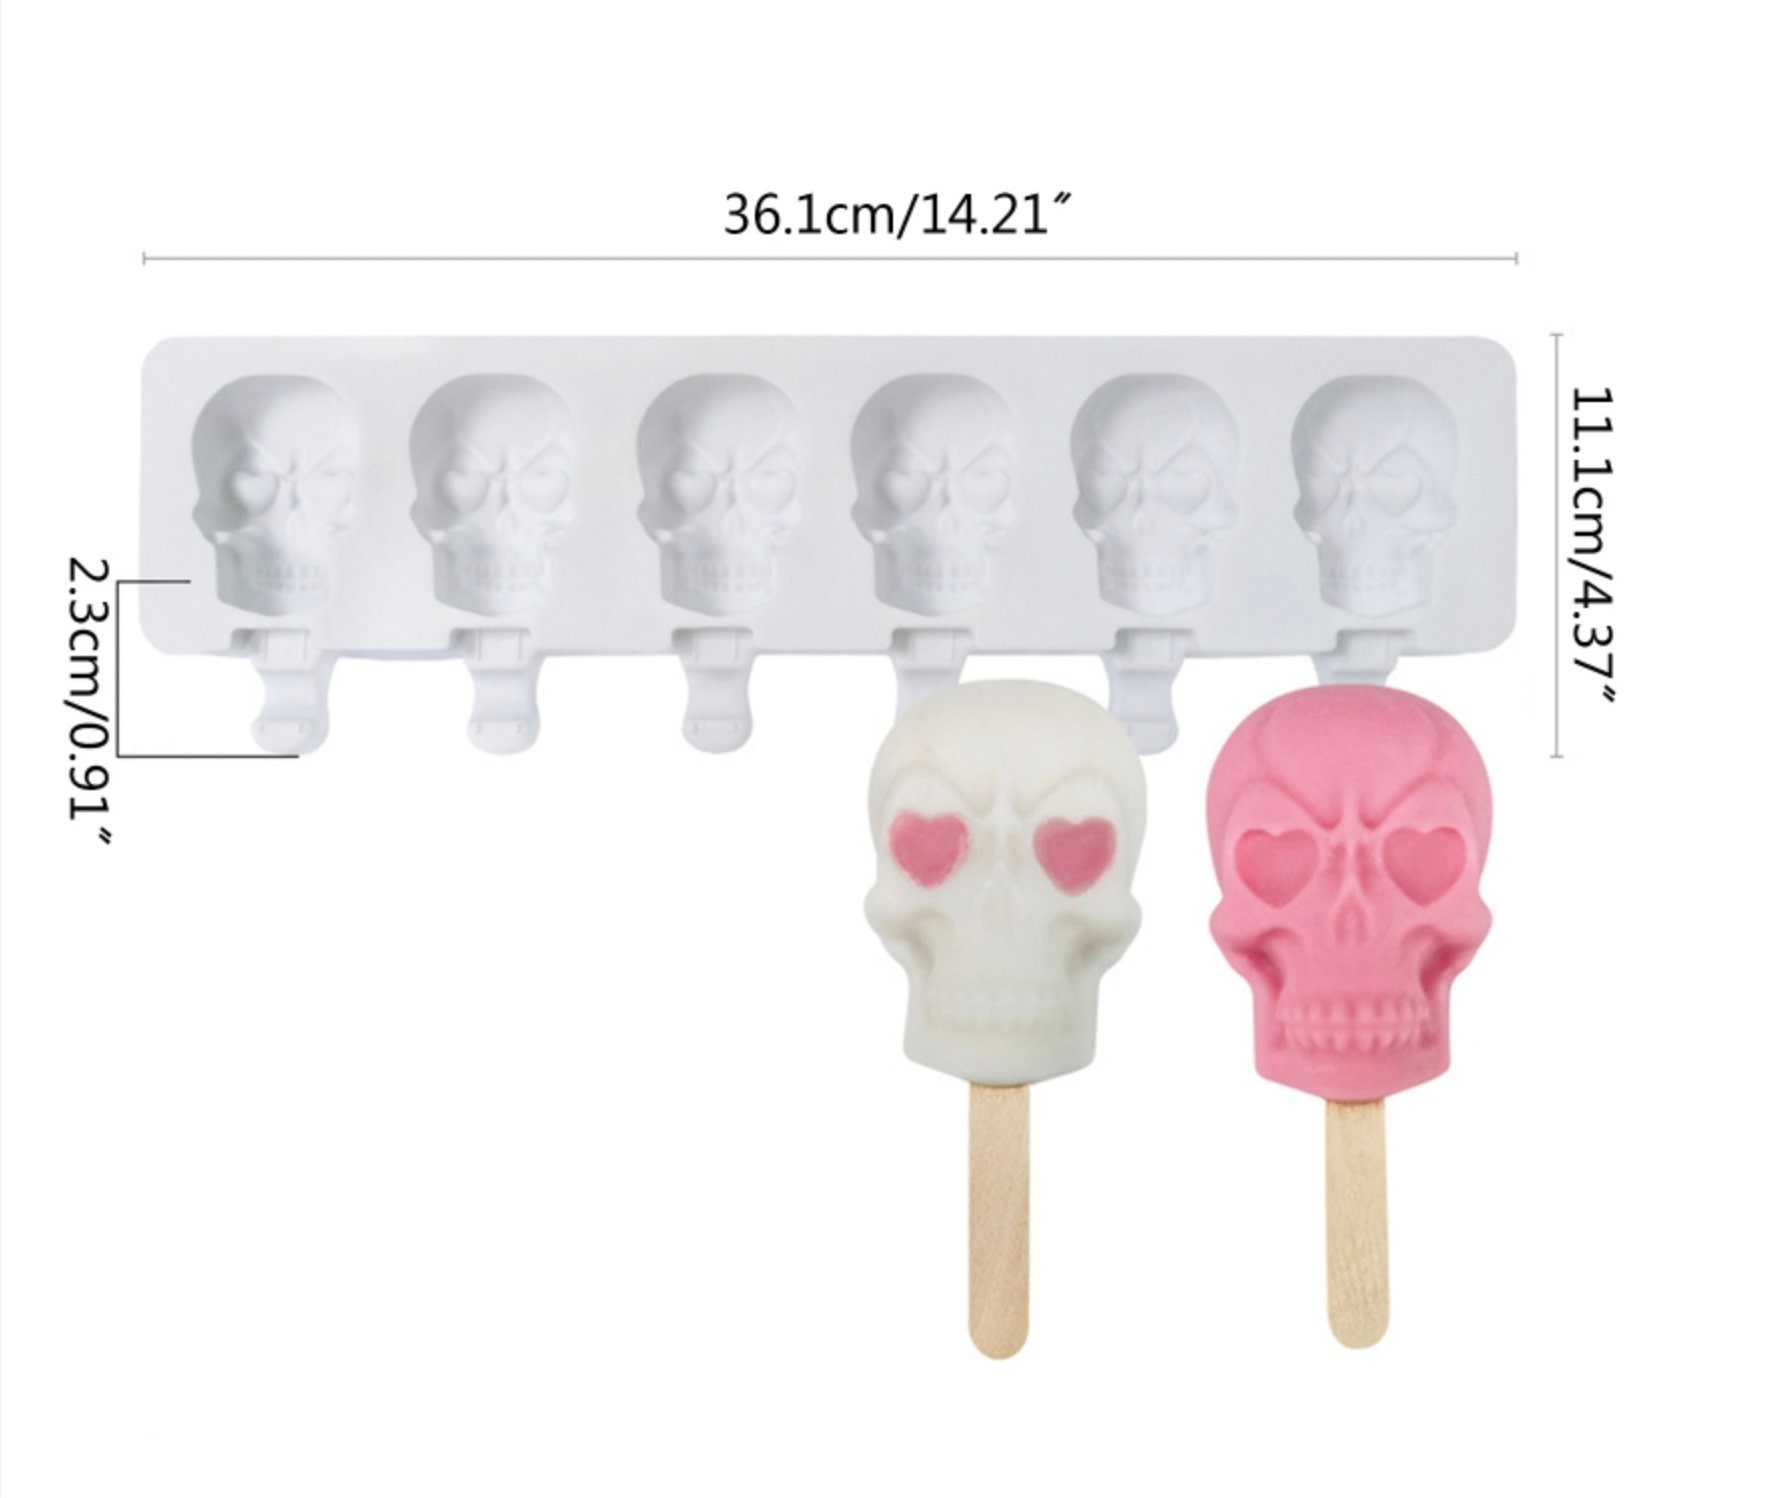 Ghost Cakesicle Mold